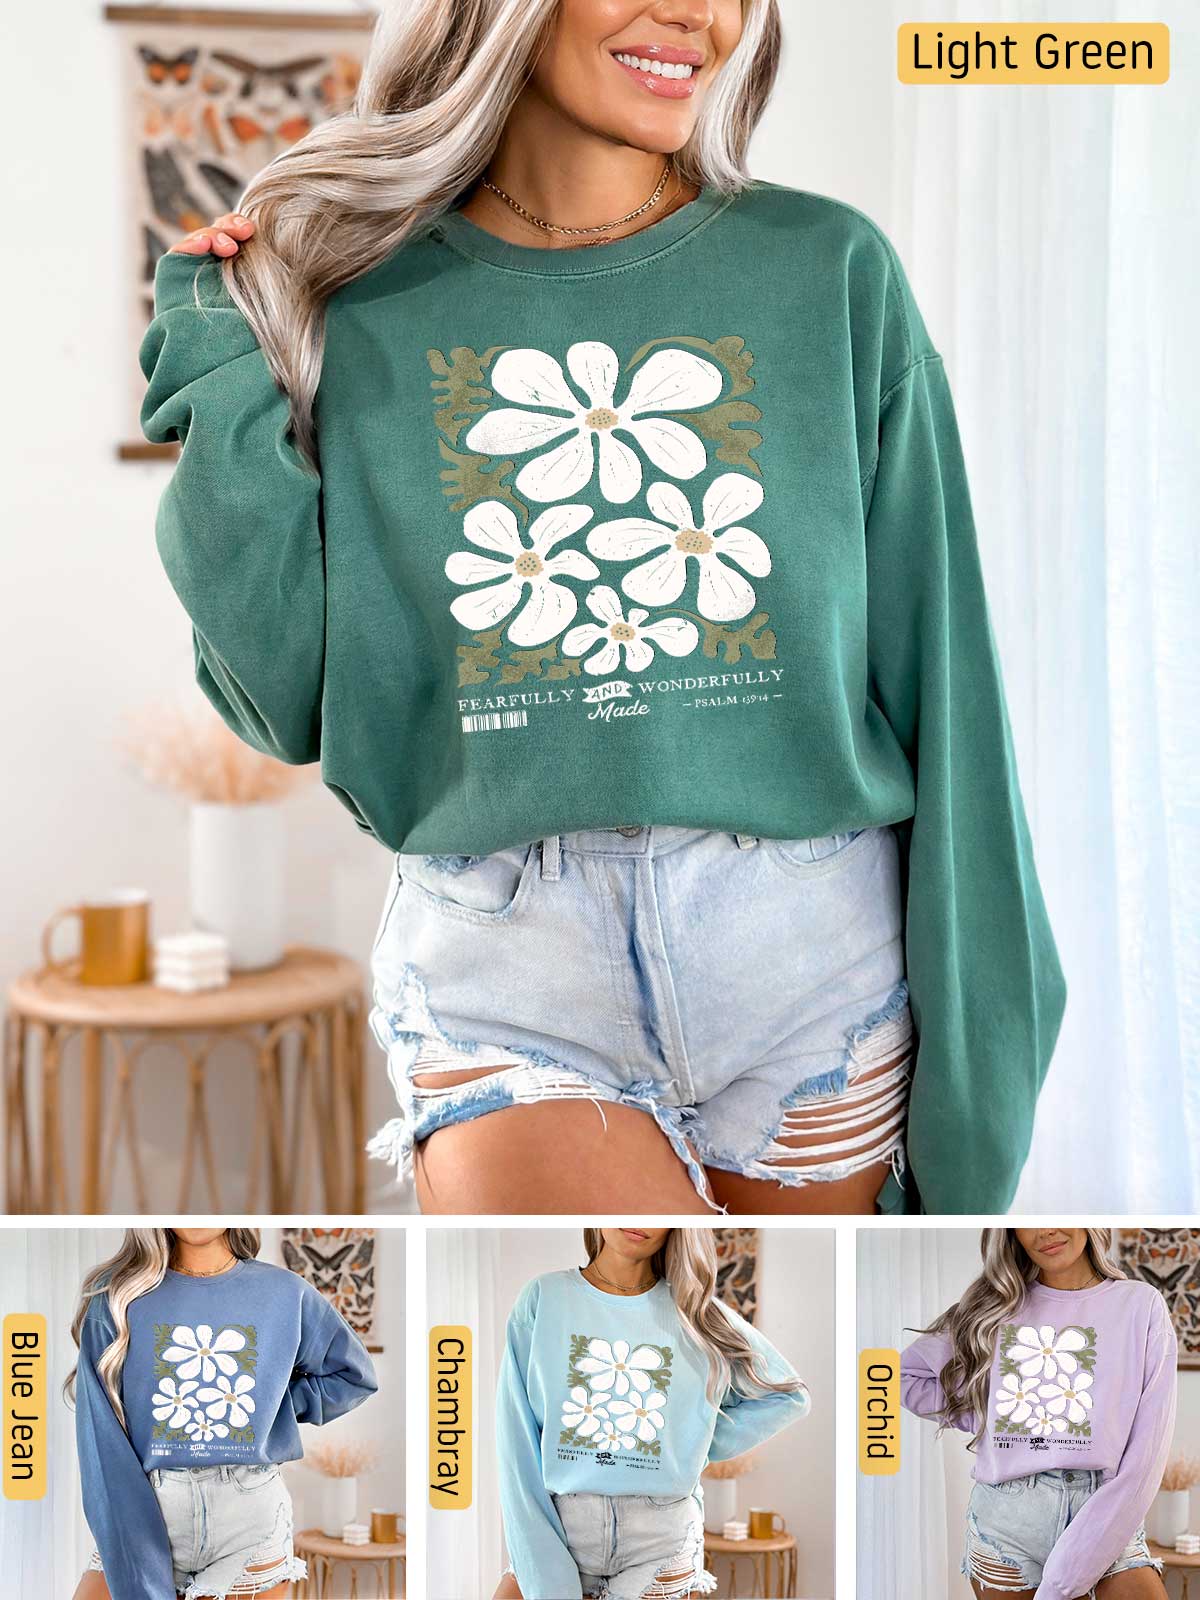 a woman wearing a green sweatshirt with white flowers on it